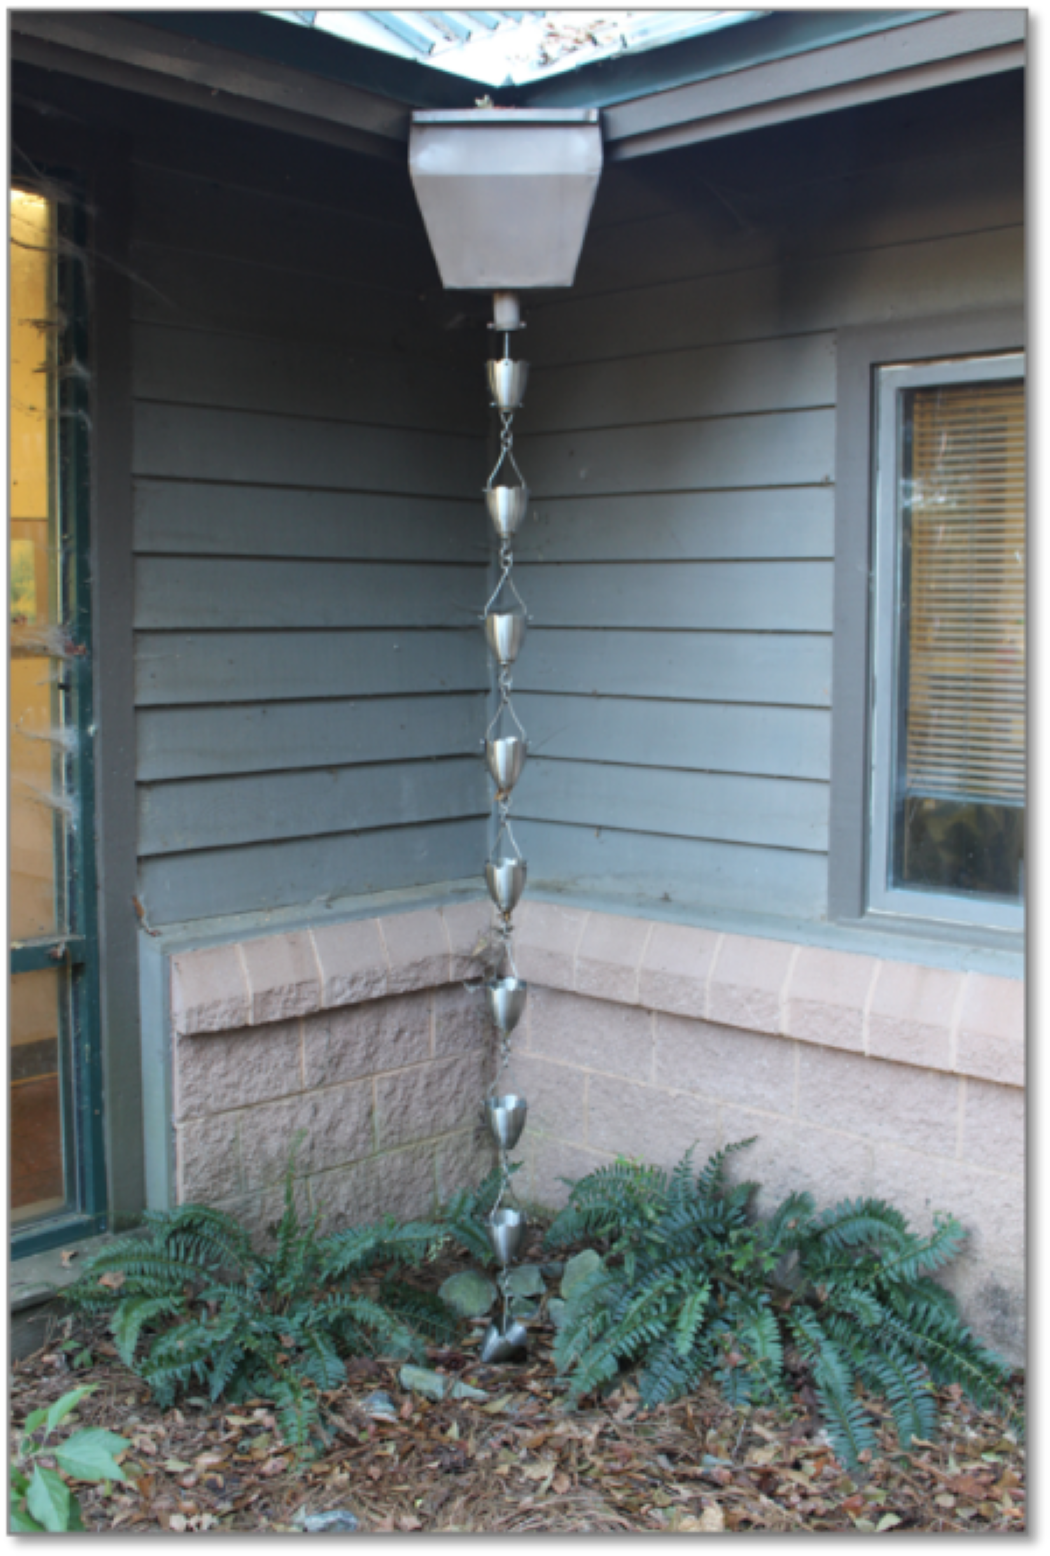 II. Benefits of Rain Chains for Water Harvesting